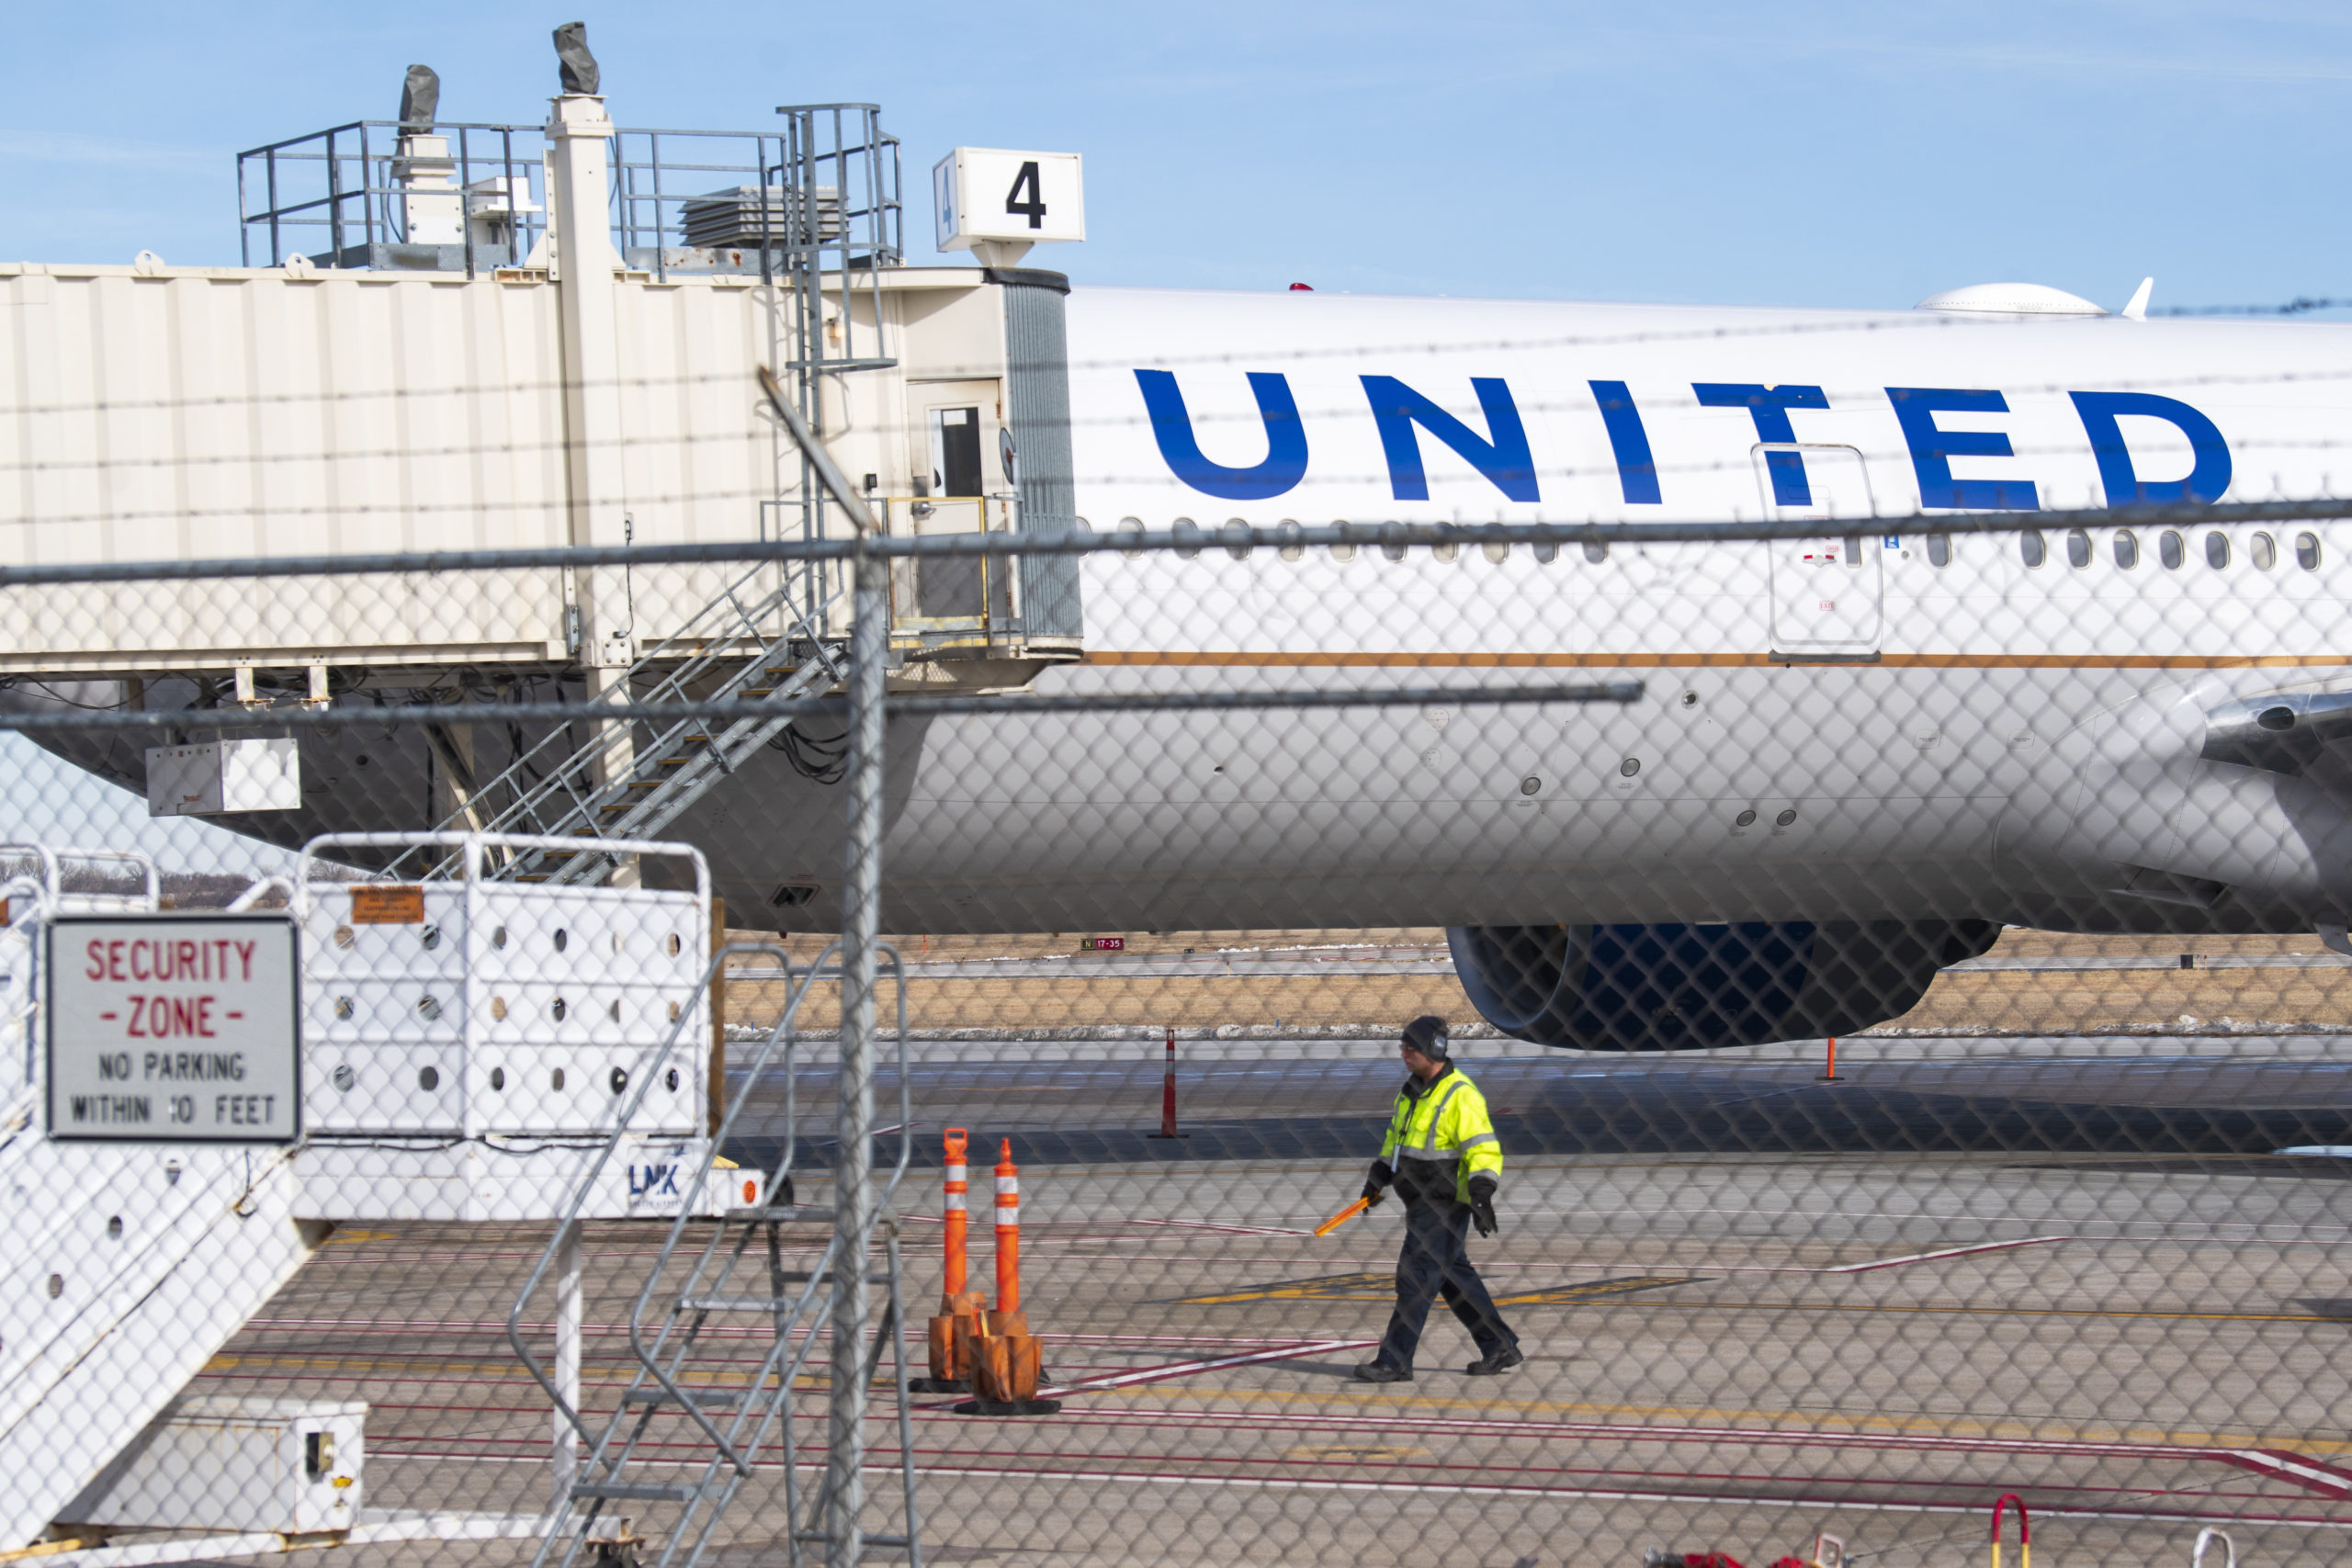 Members of the ground crew secure the site after a United airlines flight made an emergency landing...